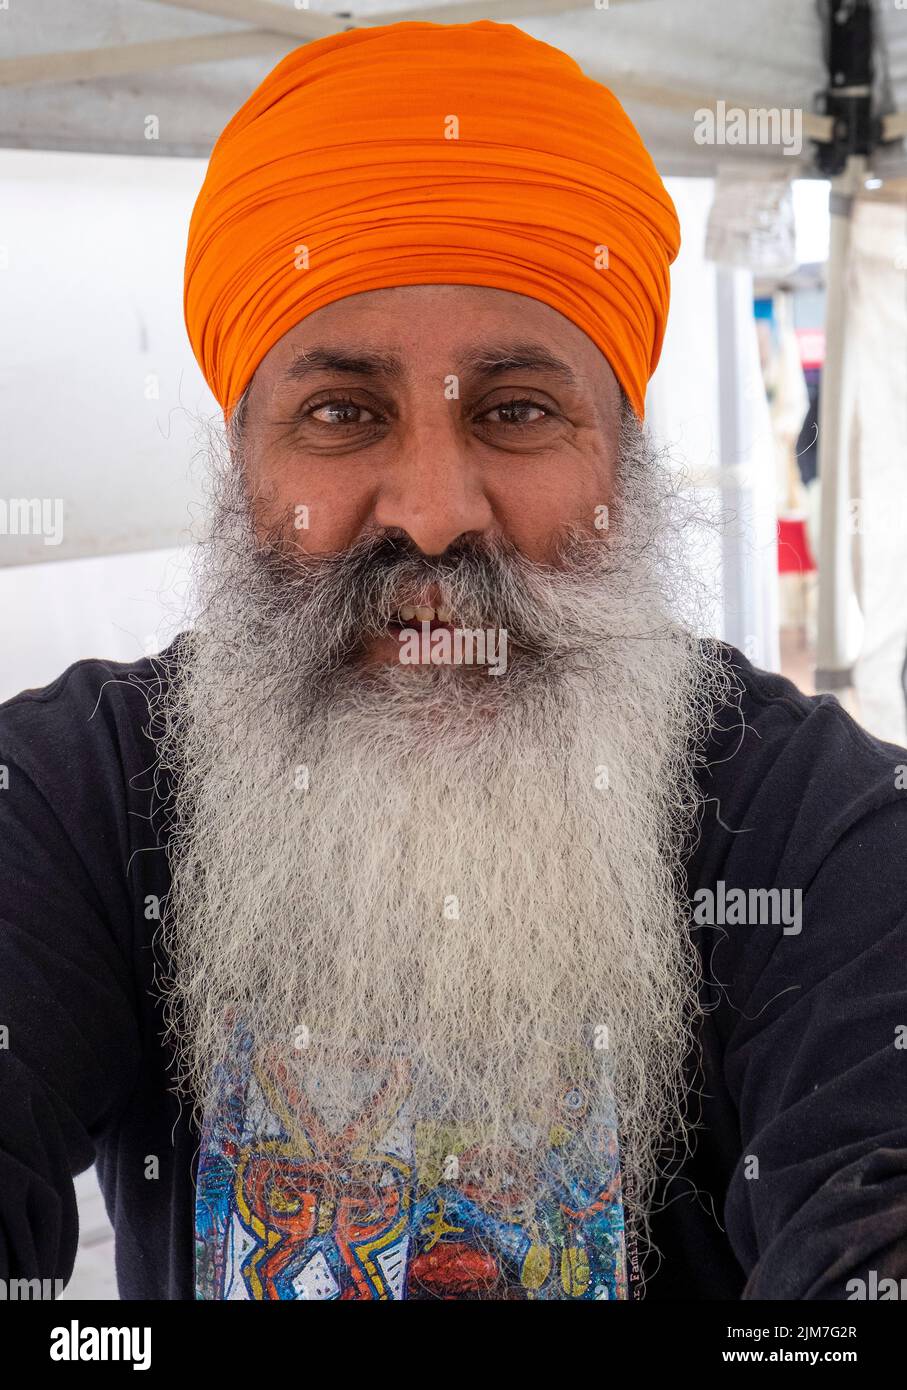 John Arkan, a member of the Sikh Australian community of Coffs Harbour, Northern Rivers area of New South Wales Stock Photo